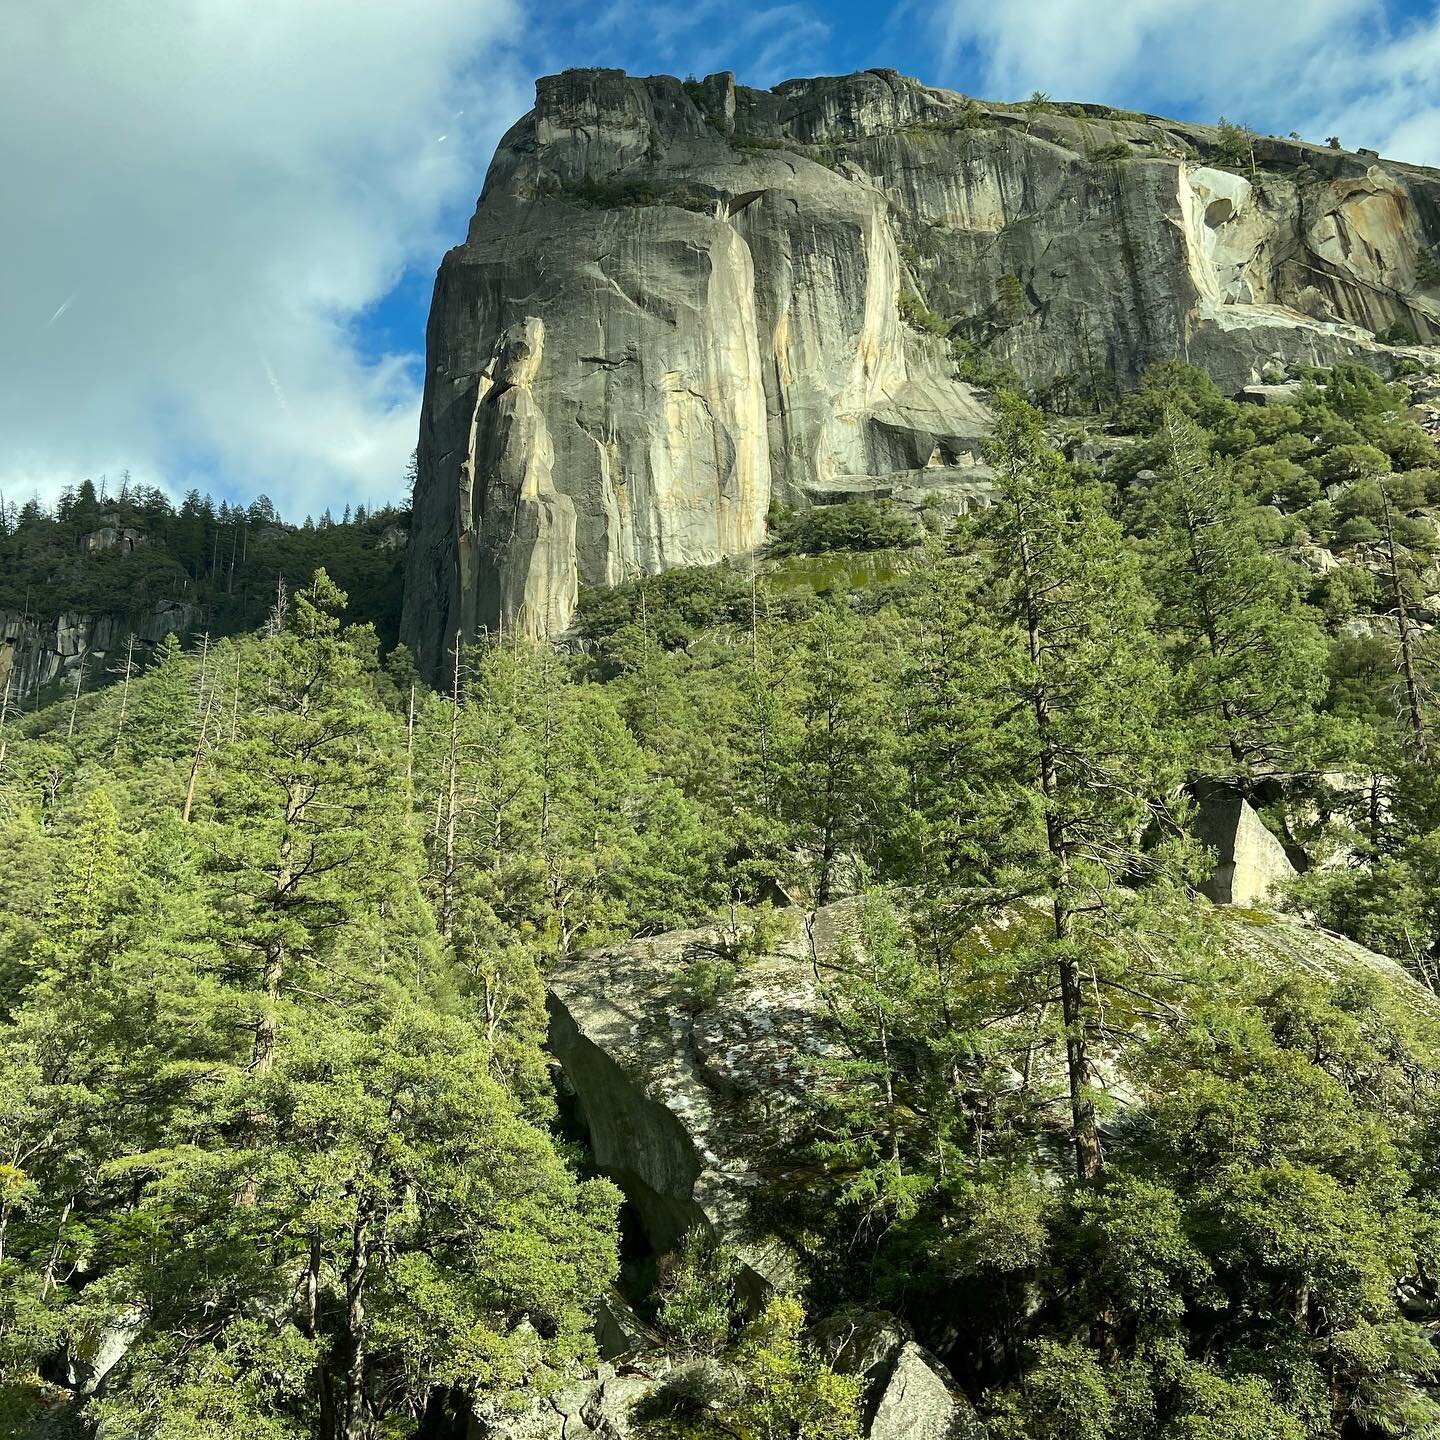 It&rsquo;s been more than a year since we&rsquo;ve left our house - we had enough.  Especially since God&rsquo;s glory is in full display just a few hundred miles away. Yosemite was just the right location for our first para-pandemic jaunt - moderate